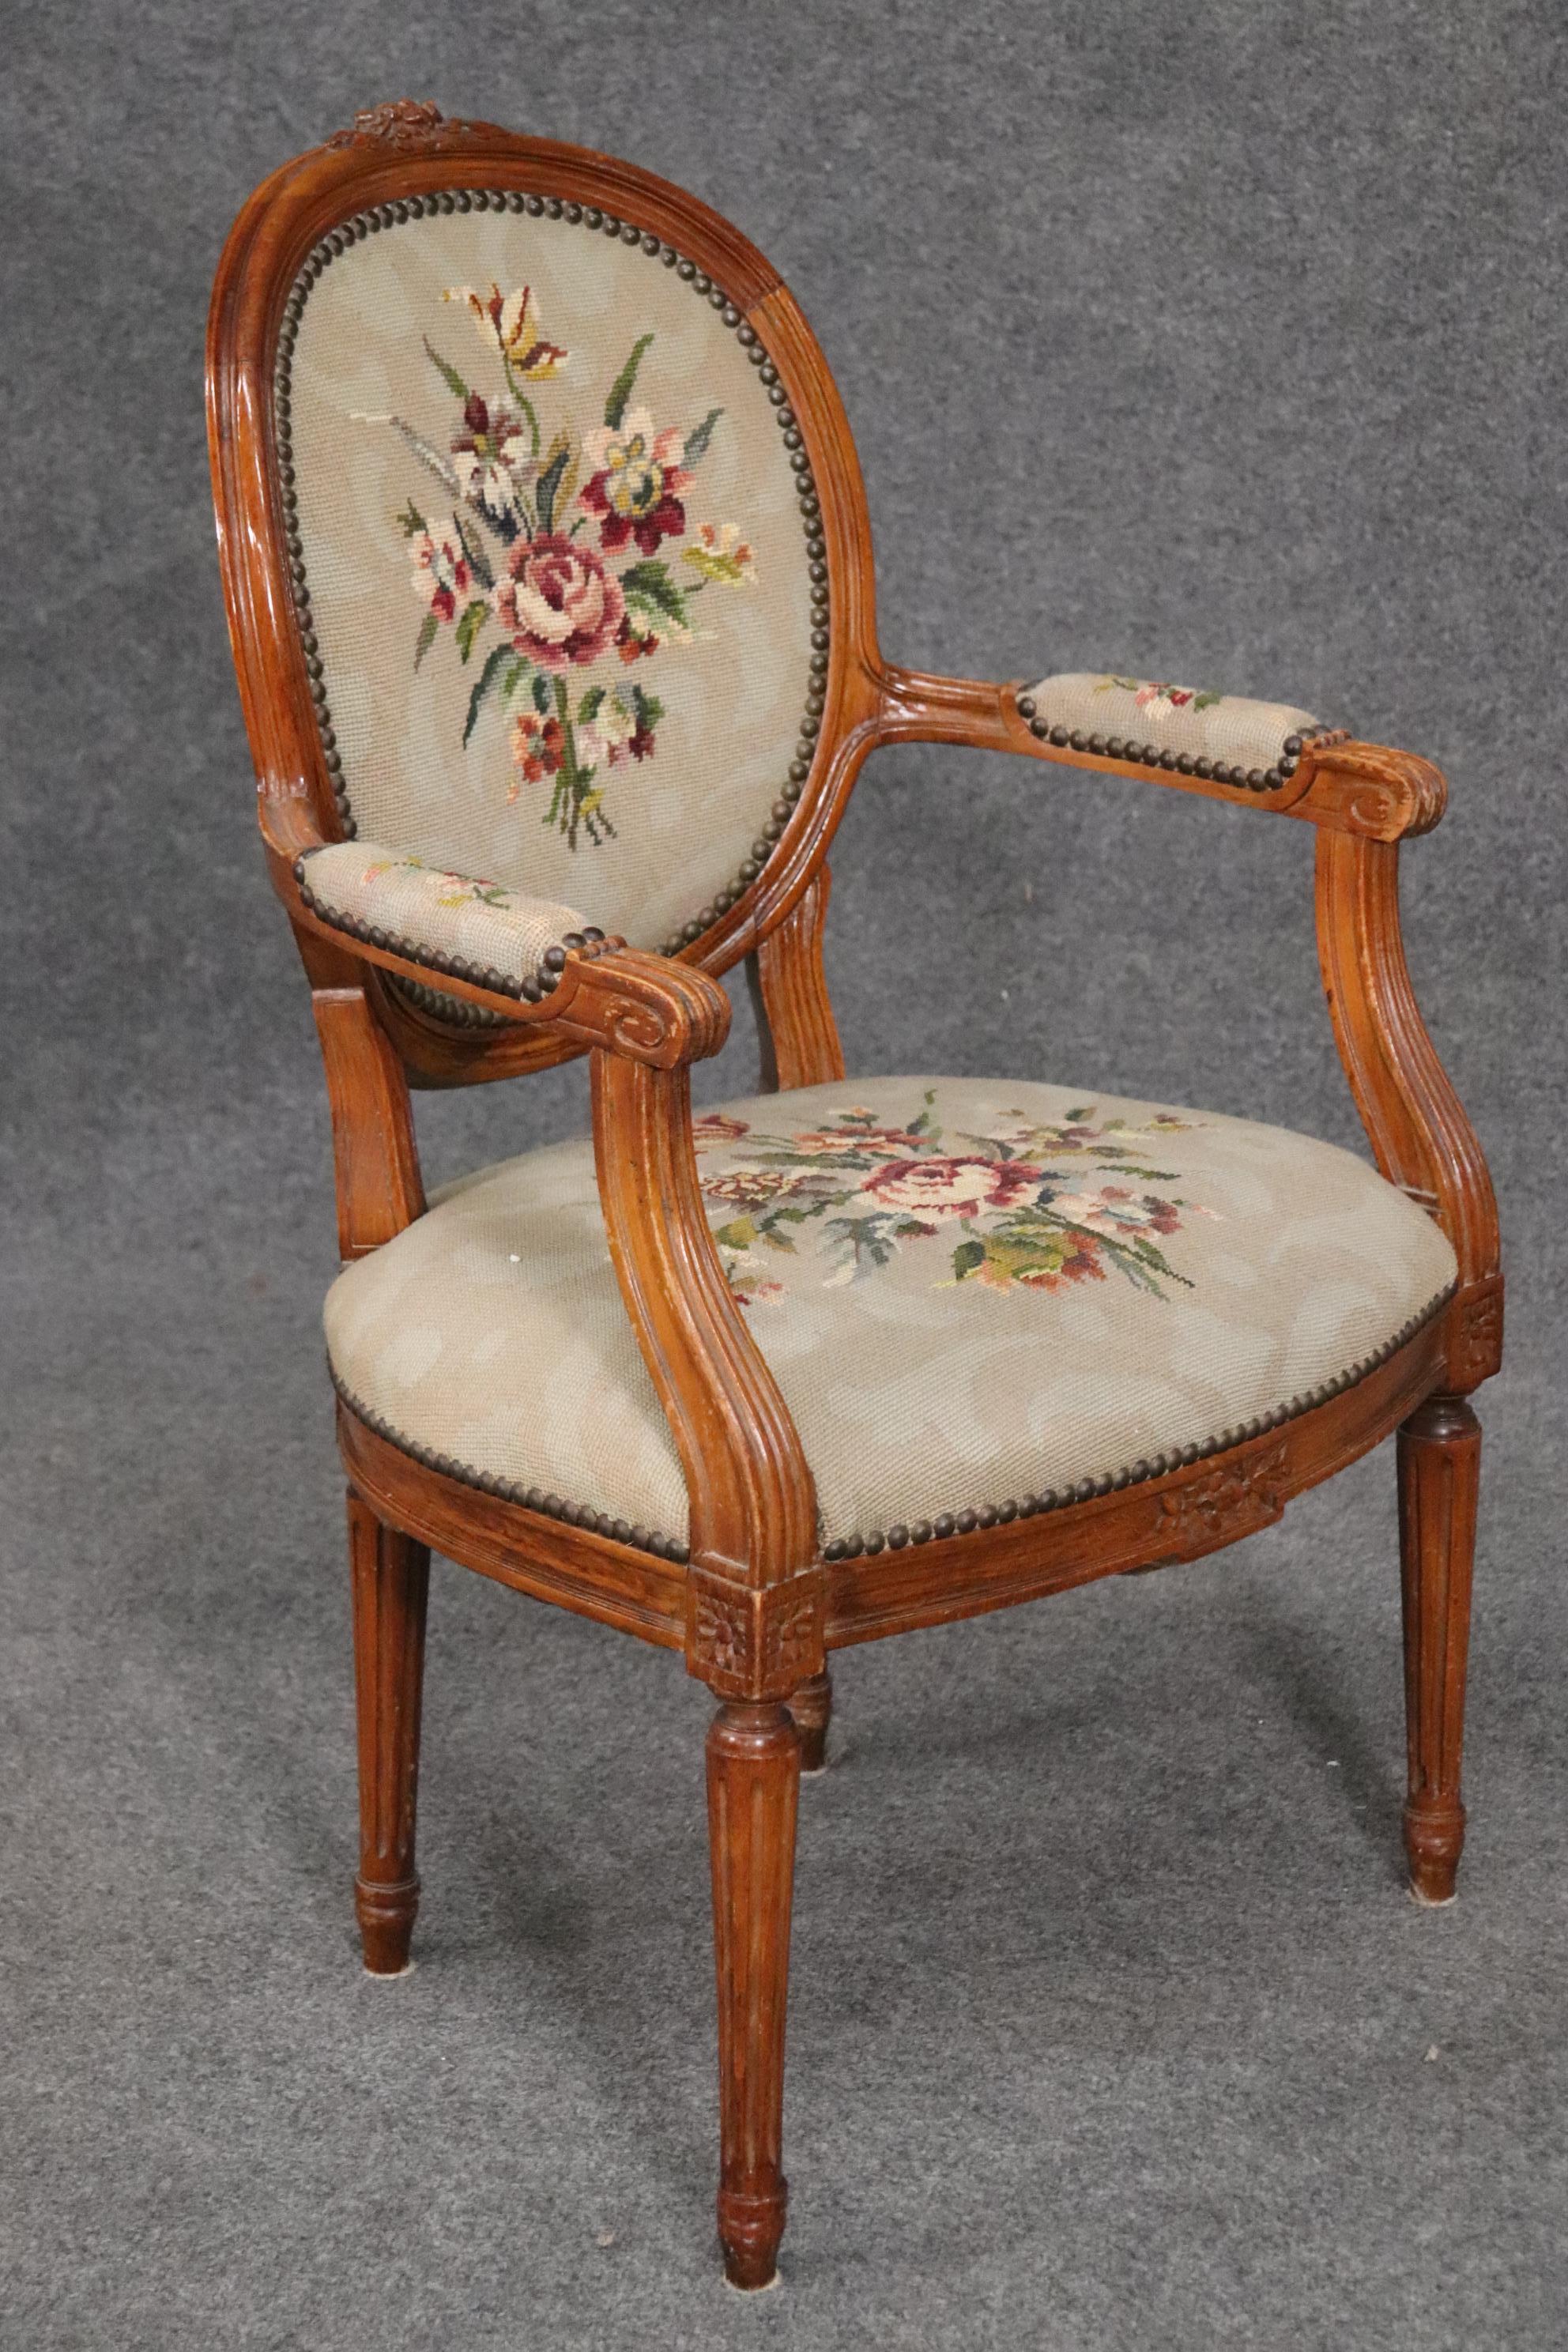 This is a beautiful chair that's perfect for a desk or vanity. The chair is in good condition and has a beautiful needlepoint upholstery. The chair measures 36 tall x 22 wide x 21 deep and the seat height is 17 inches. Dates to the 1940s.